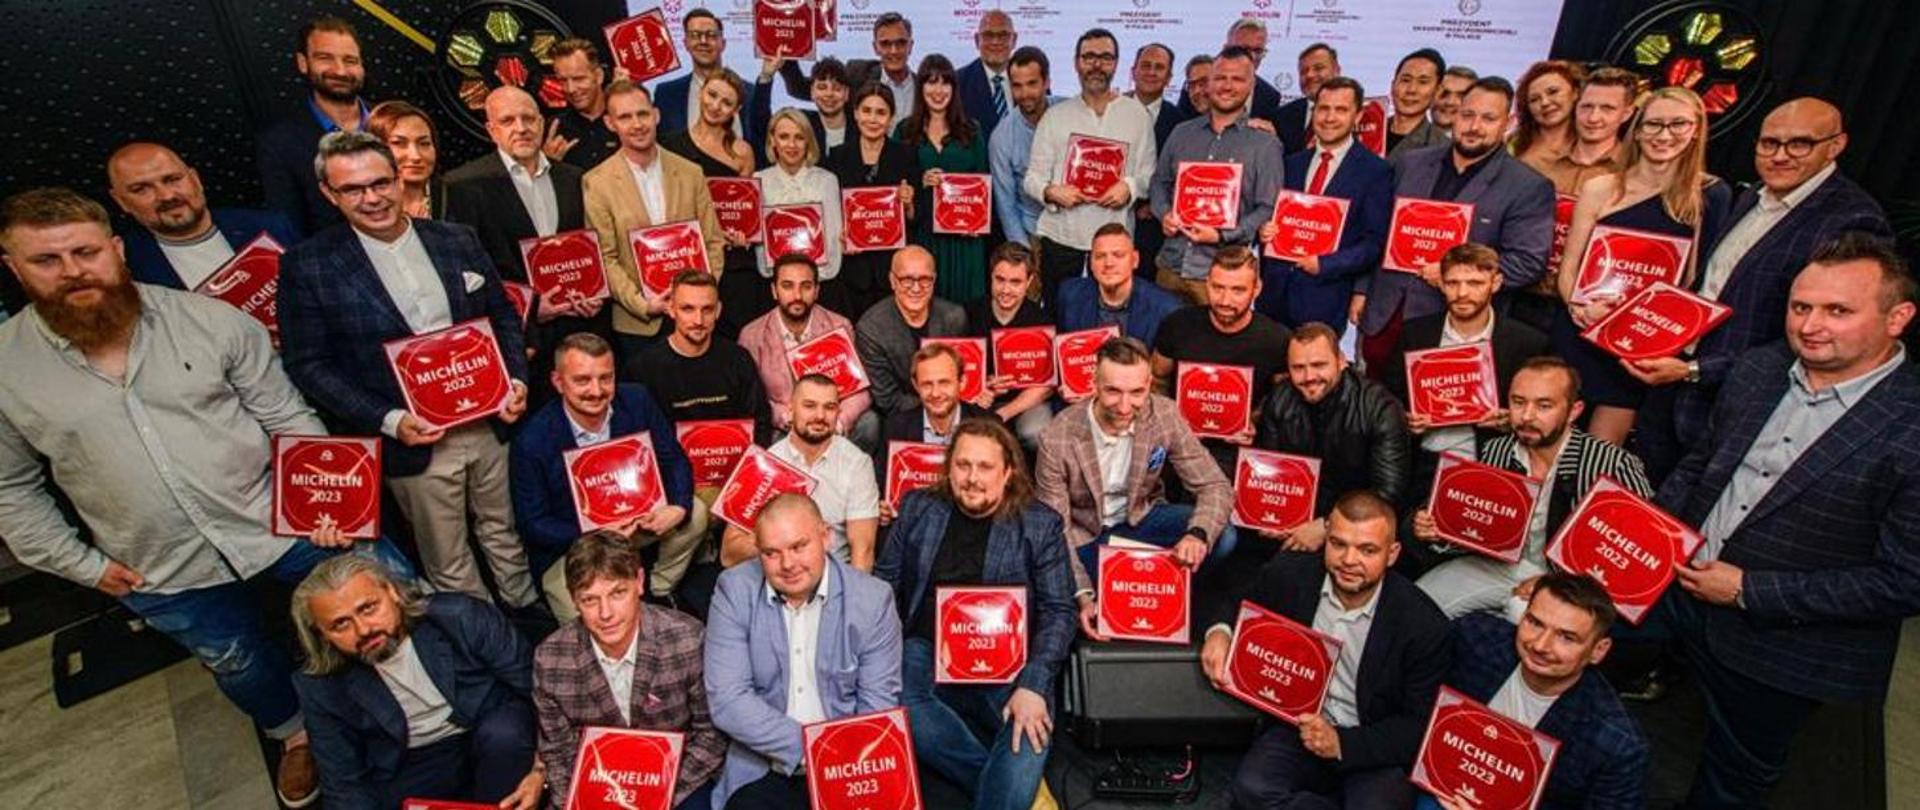 a group photo of owners of restaurants awarded with Michelin Plaques